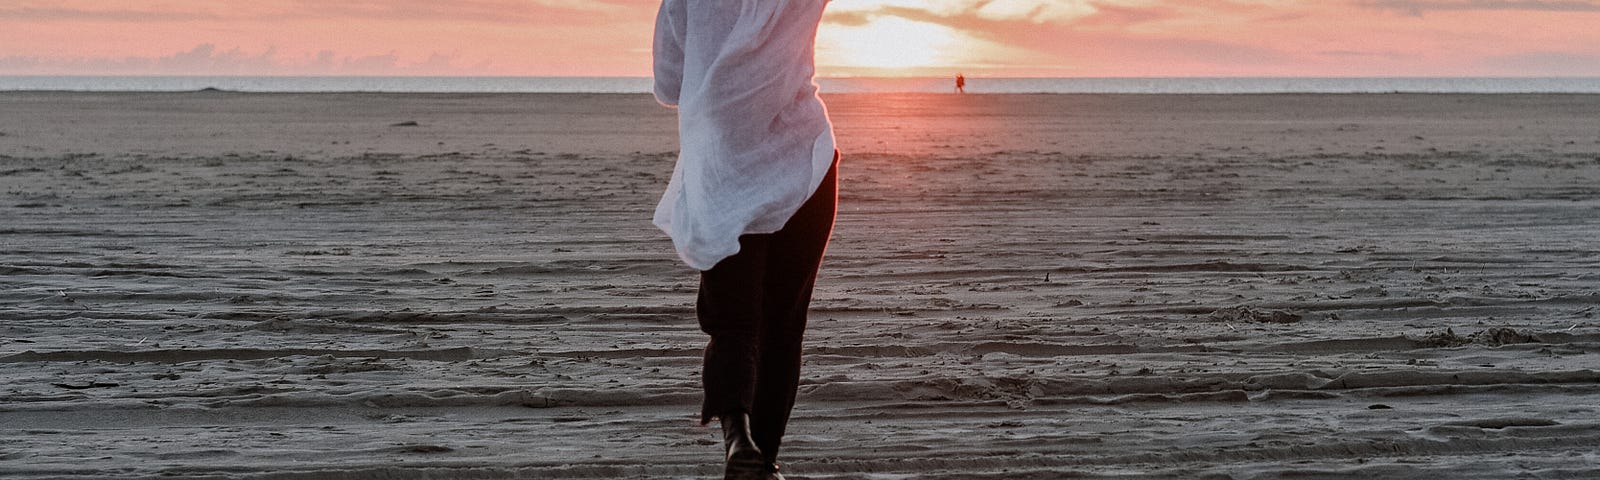 Here is a photo of a young woman at the beach, seeing the beauty of a sunset, representing the beauty of God’s creation.